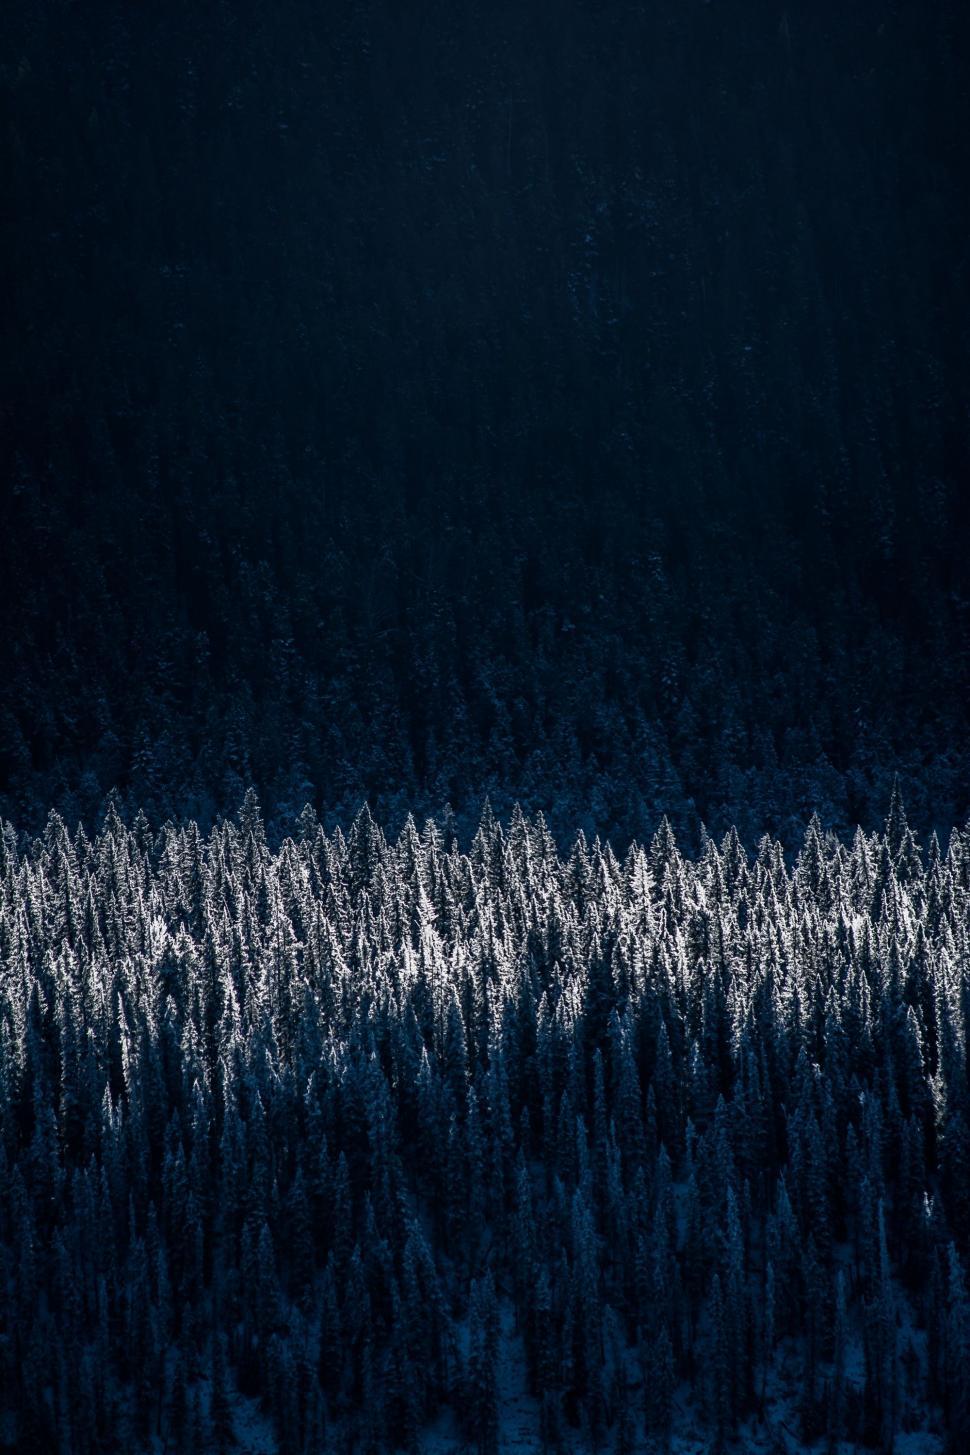 Free Image of A Nighttime Forest Landscape 